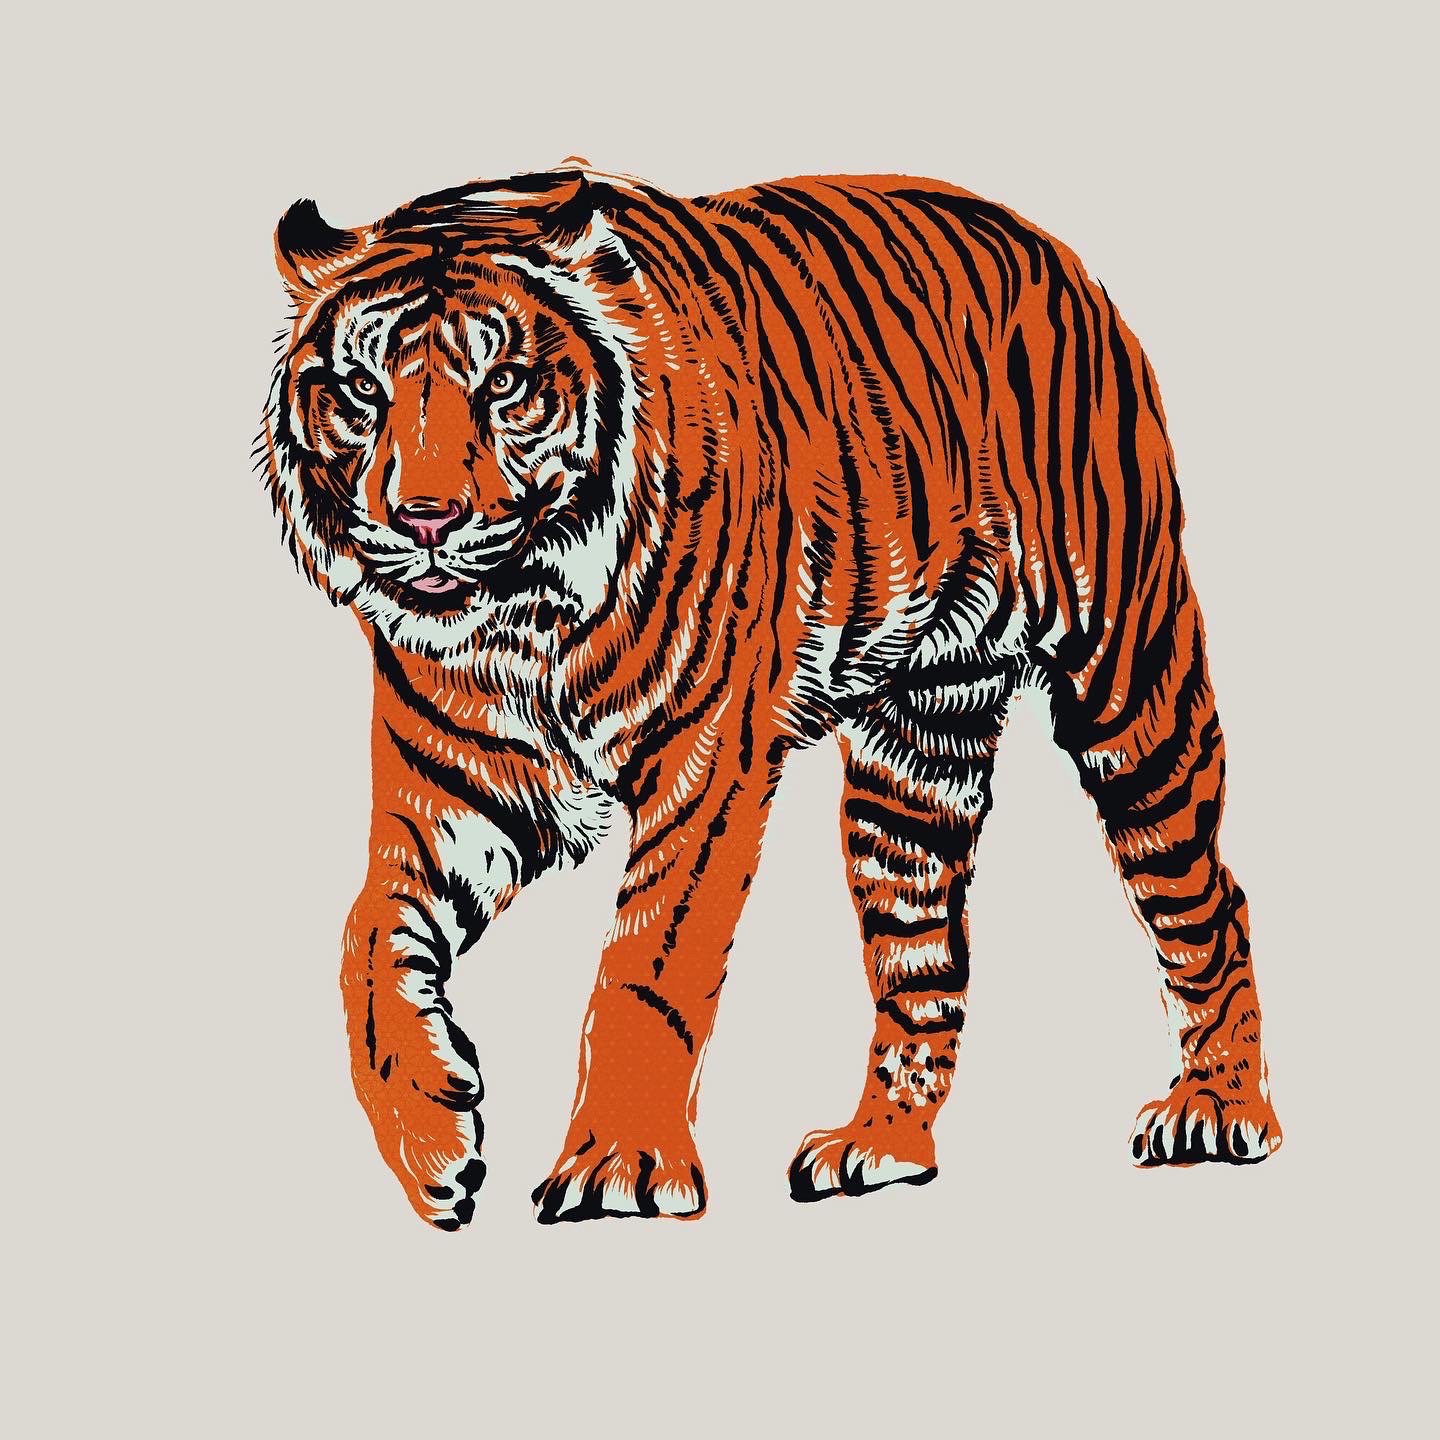 Gorgeous tiger painted with Quill & Ink brushes.